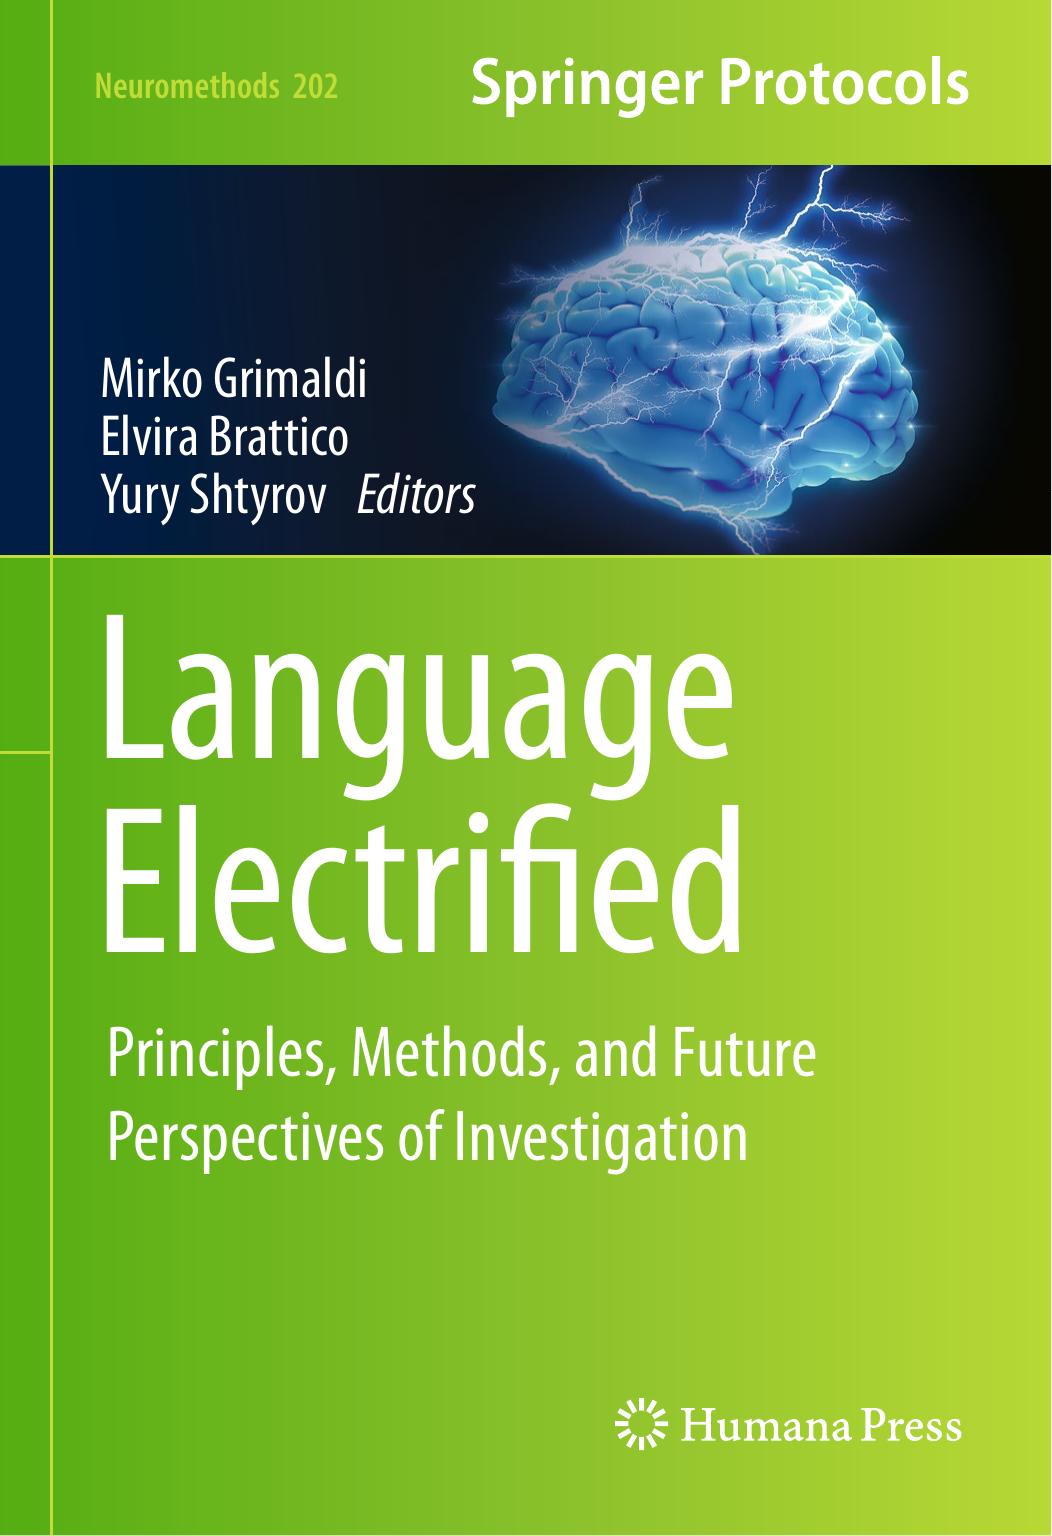 Language Electrified: Principles, Methods, and Future Perspectives of Investigation